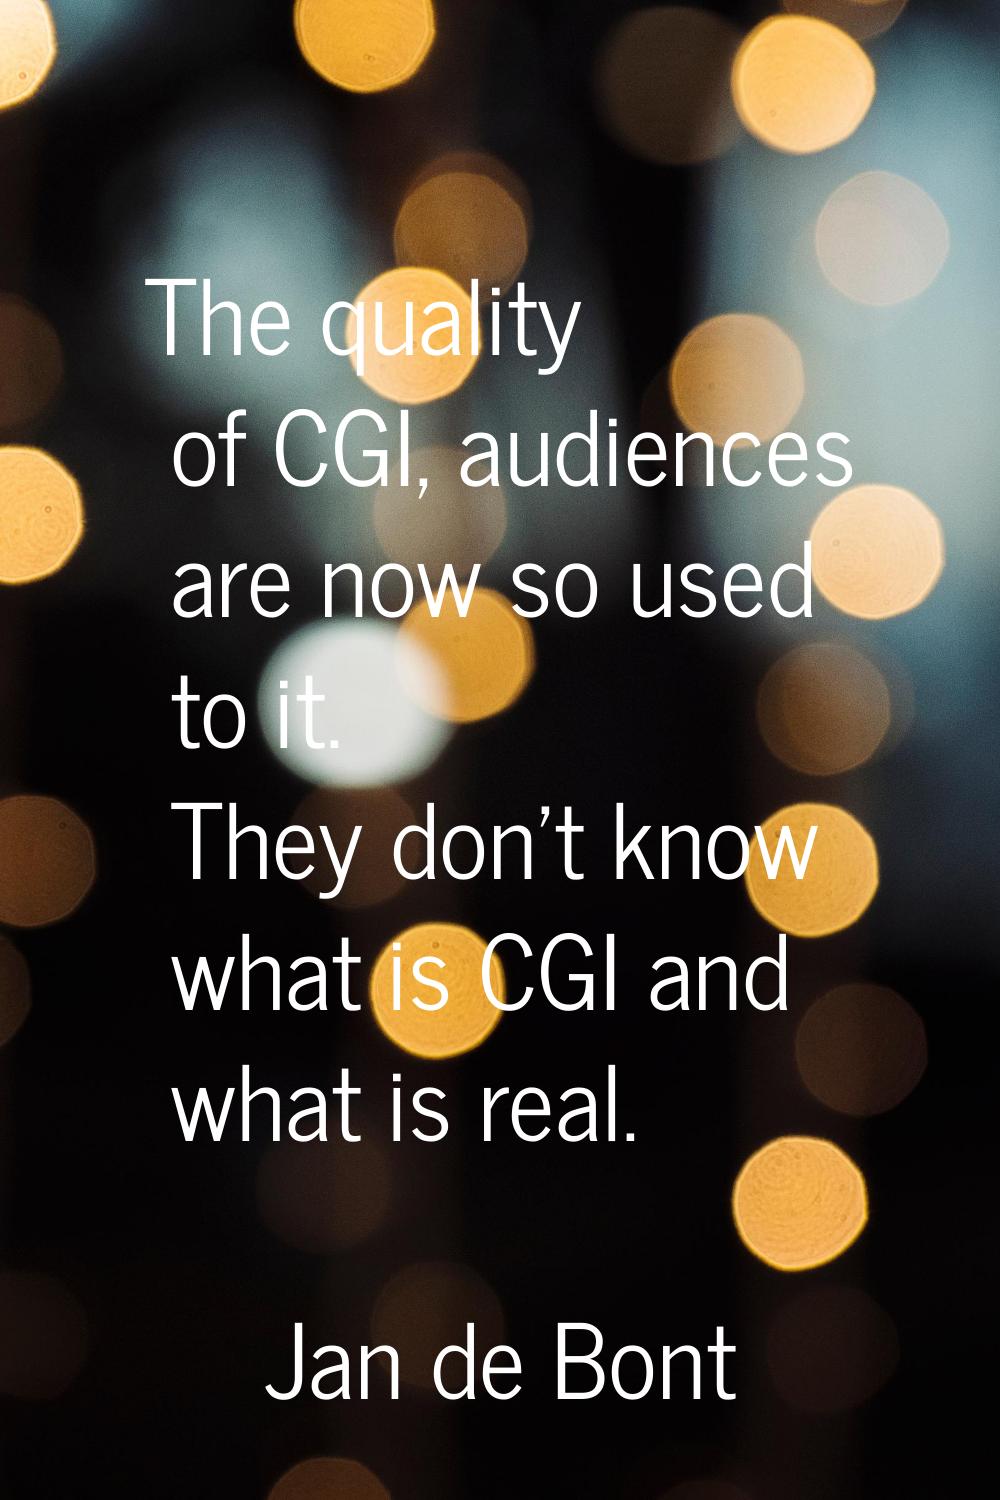 The quality of CGI, audiences are now so used to it. They don't know what is CGI and what is real.